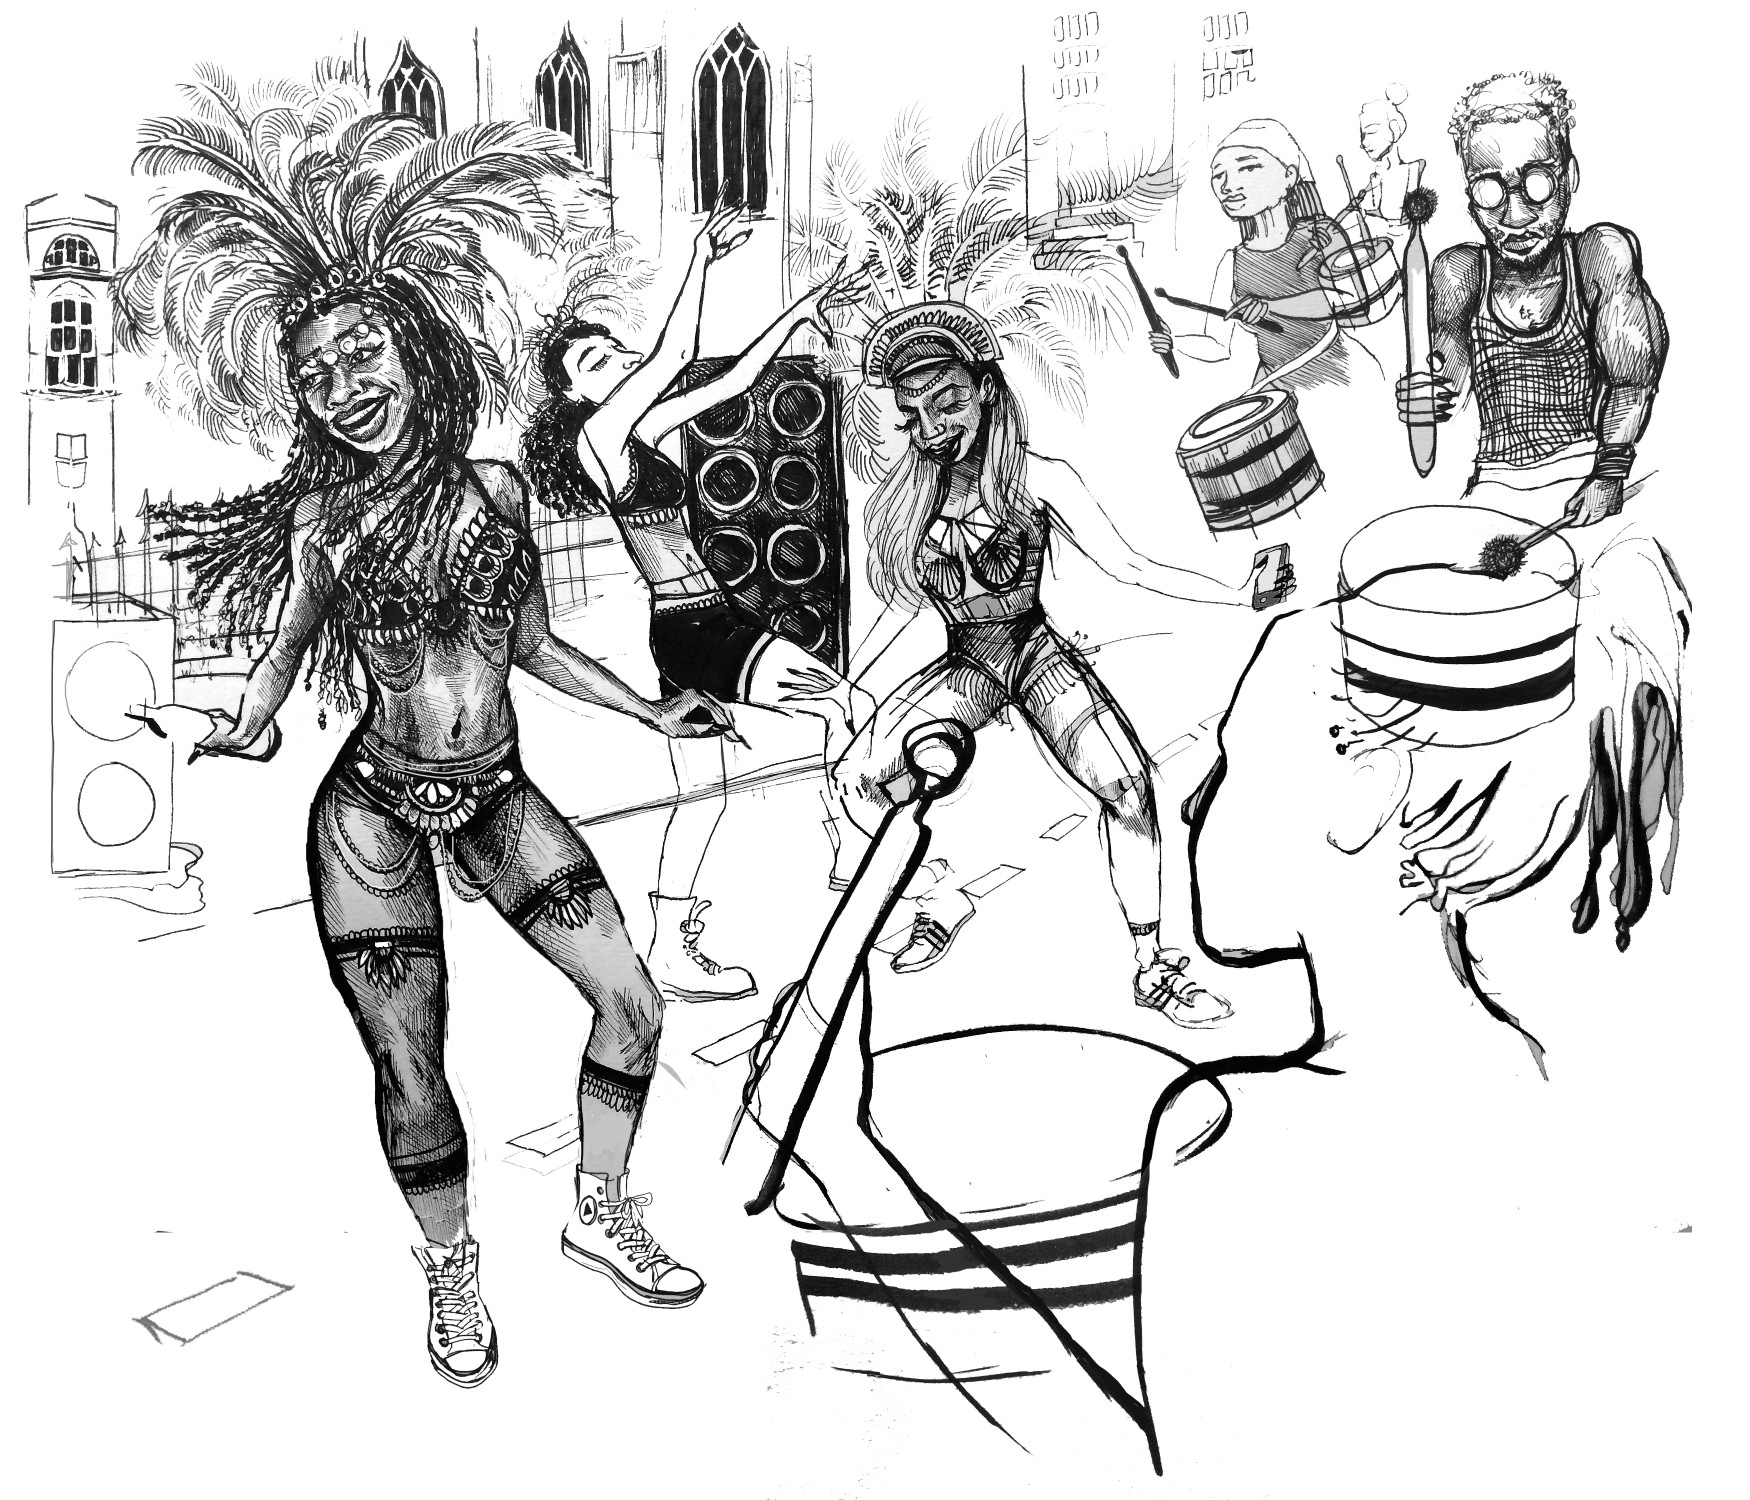 Illustration by Jasmine Thompson showing African Caribbean women dancing in traditional carnival outfits and headdresses, surrounded by sound systems and people playing the drums